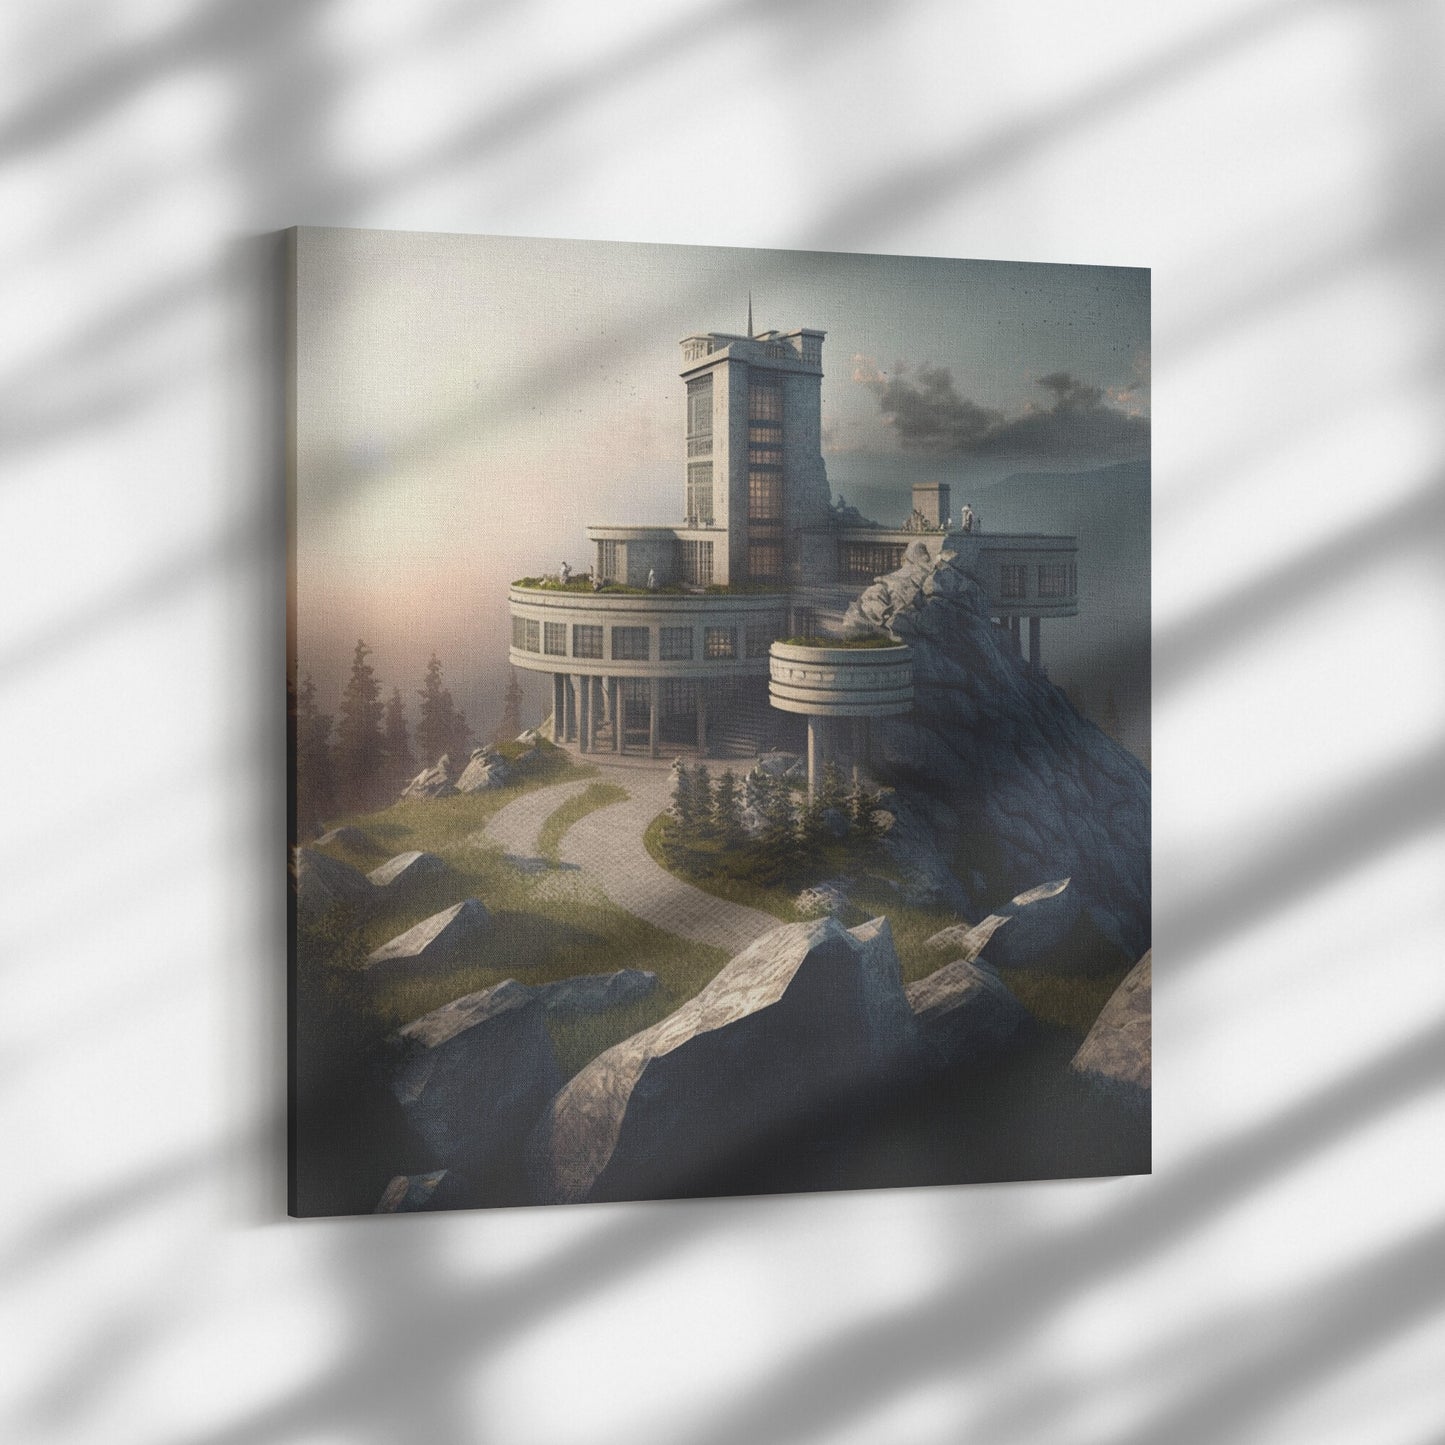 Mountain Top Observatory, Stone Observatory Concept Architecture, Midjourney AI Art